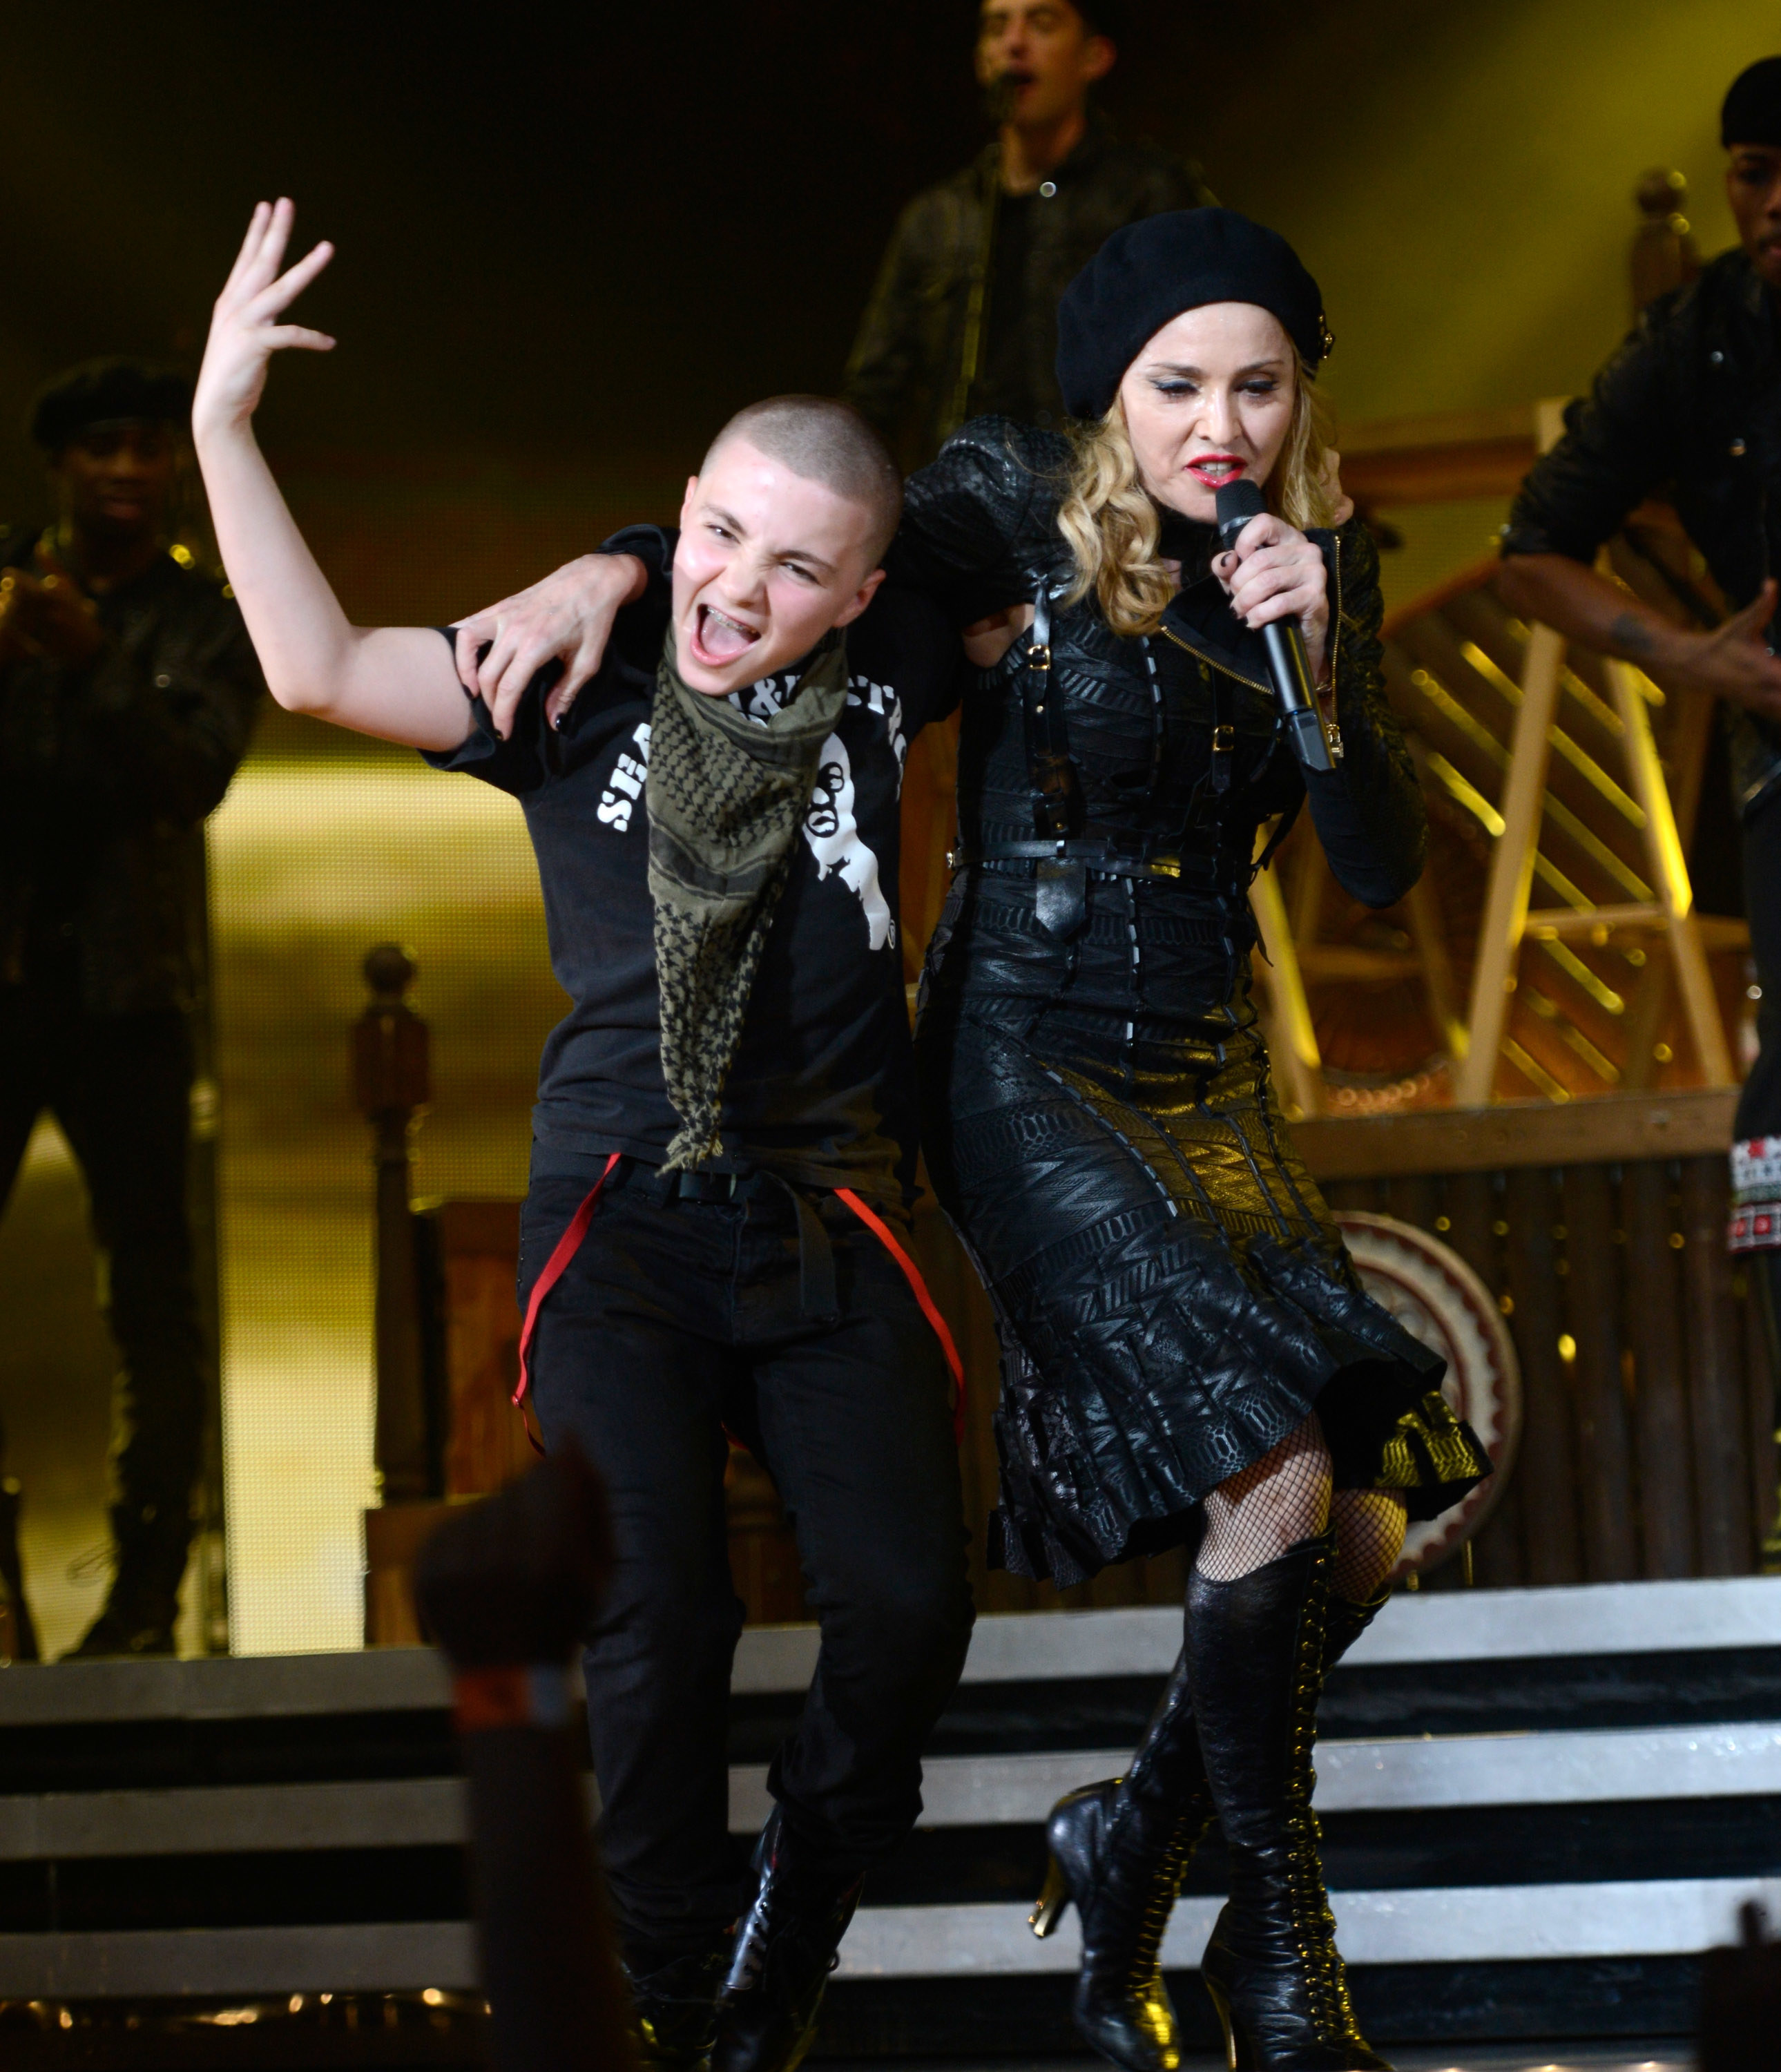 Rocco Ritchie and Madonna perform during the MDNA North America tour opener at the Wells Fargo Center on August 28, 2012 in Philadelphia, Pennsylvania